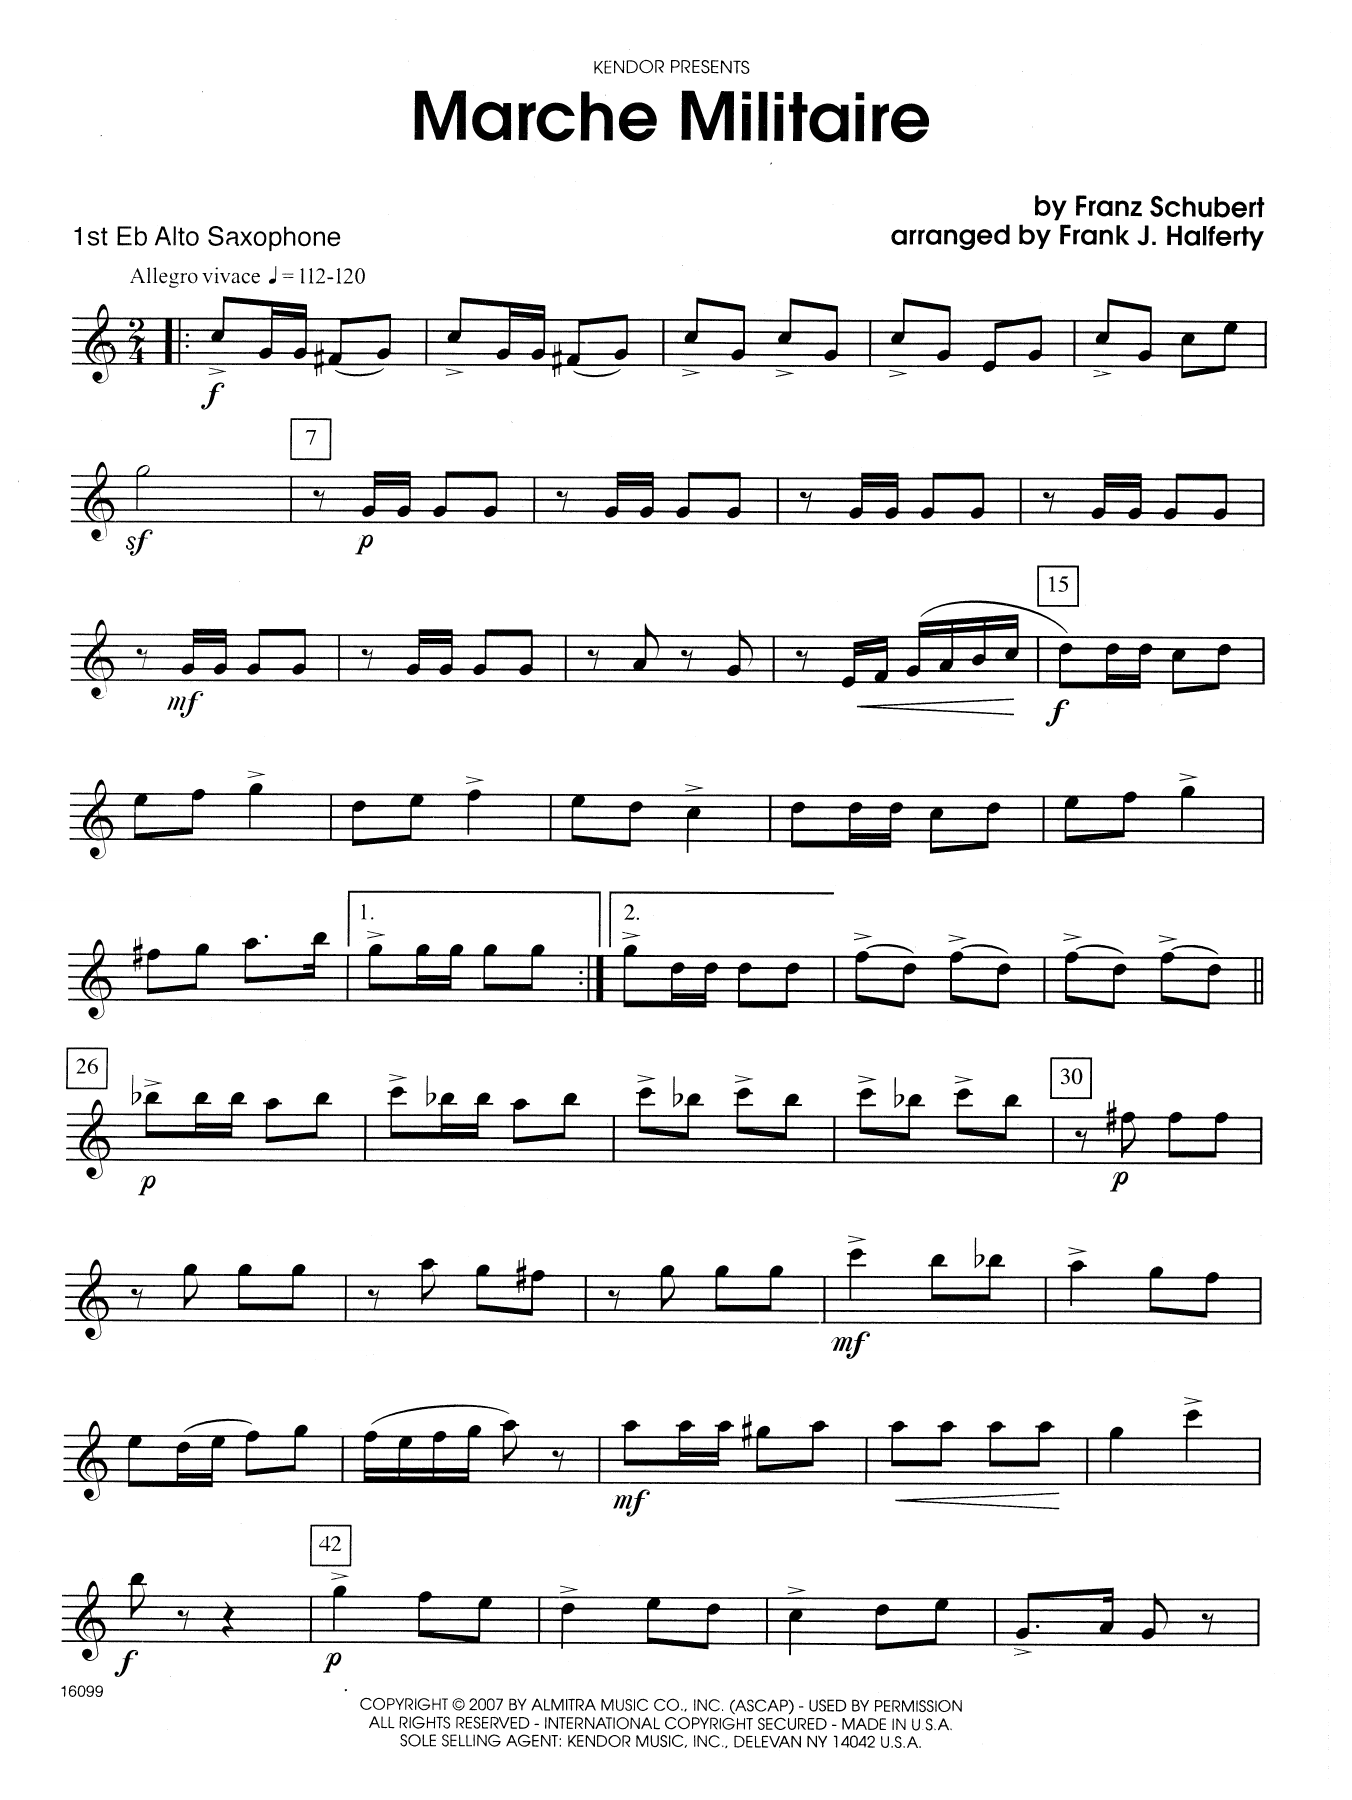 Frank J. Halferty Marche Militaire - 1st Eb Alto Saxophone sheet music notes and chords. Download Printable PDF.